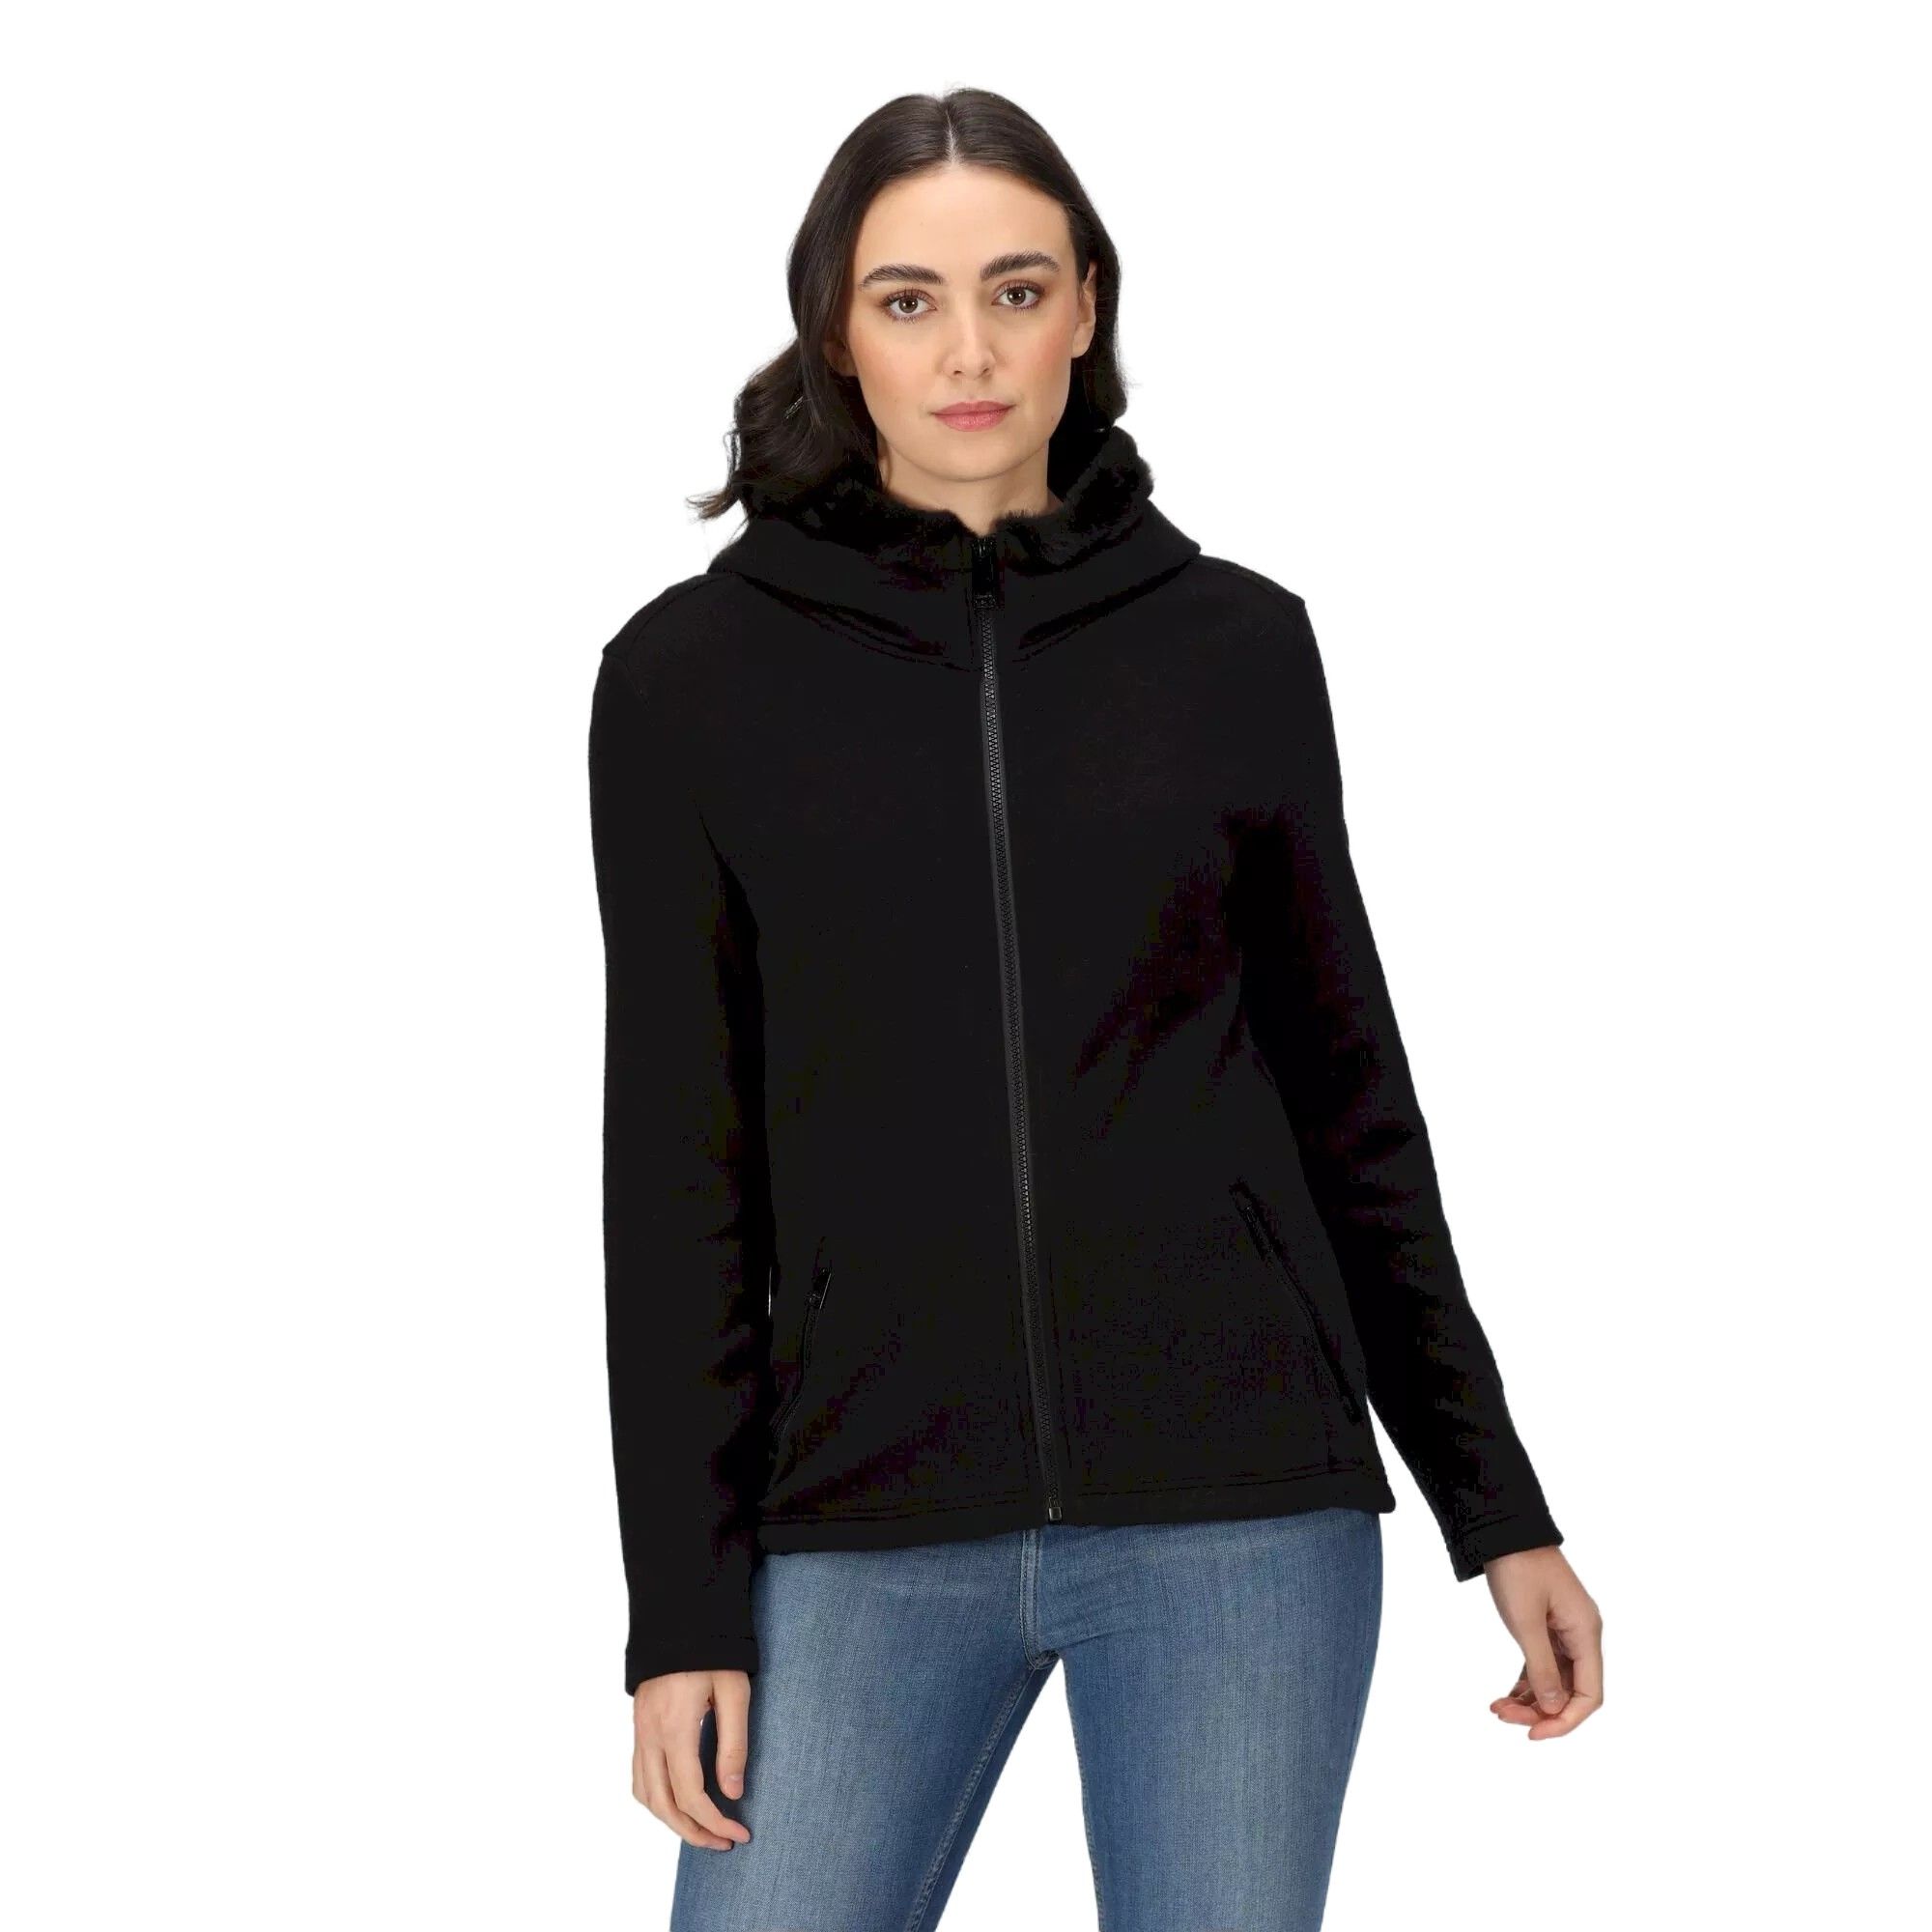 Material: 50% Viscose, 25% Polyamide, 25% Polyester. Fabric: Fleece, Knitted, Soft Touch, Wool Effect. 330gsm. Design: Plain. Hood Features: Faux Fur, Grown On Hood. Fabric Technology: Hardwearing. Neckline: Hooded. Sleeve-Type: Long-Sleeved. Pockets: 2 Lower Pockets, Zip. Fastening: Full Zip.